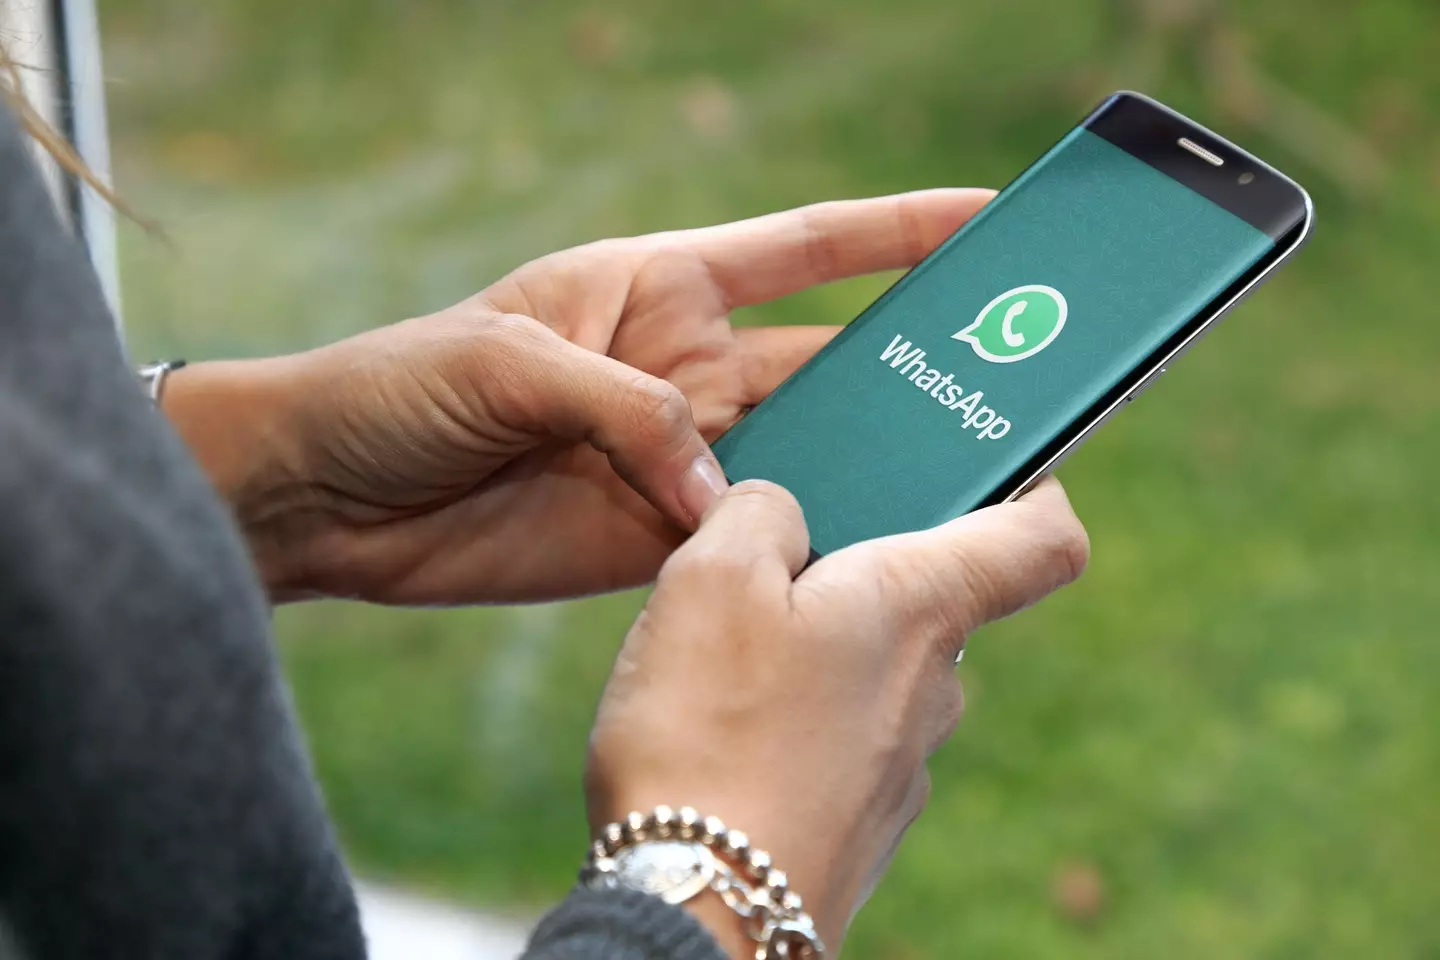 Here's how to spot the latest 'family emergency' scam on Whatsapp.